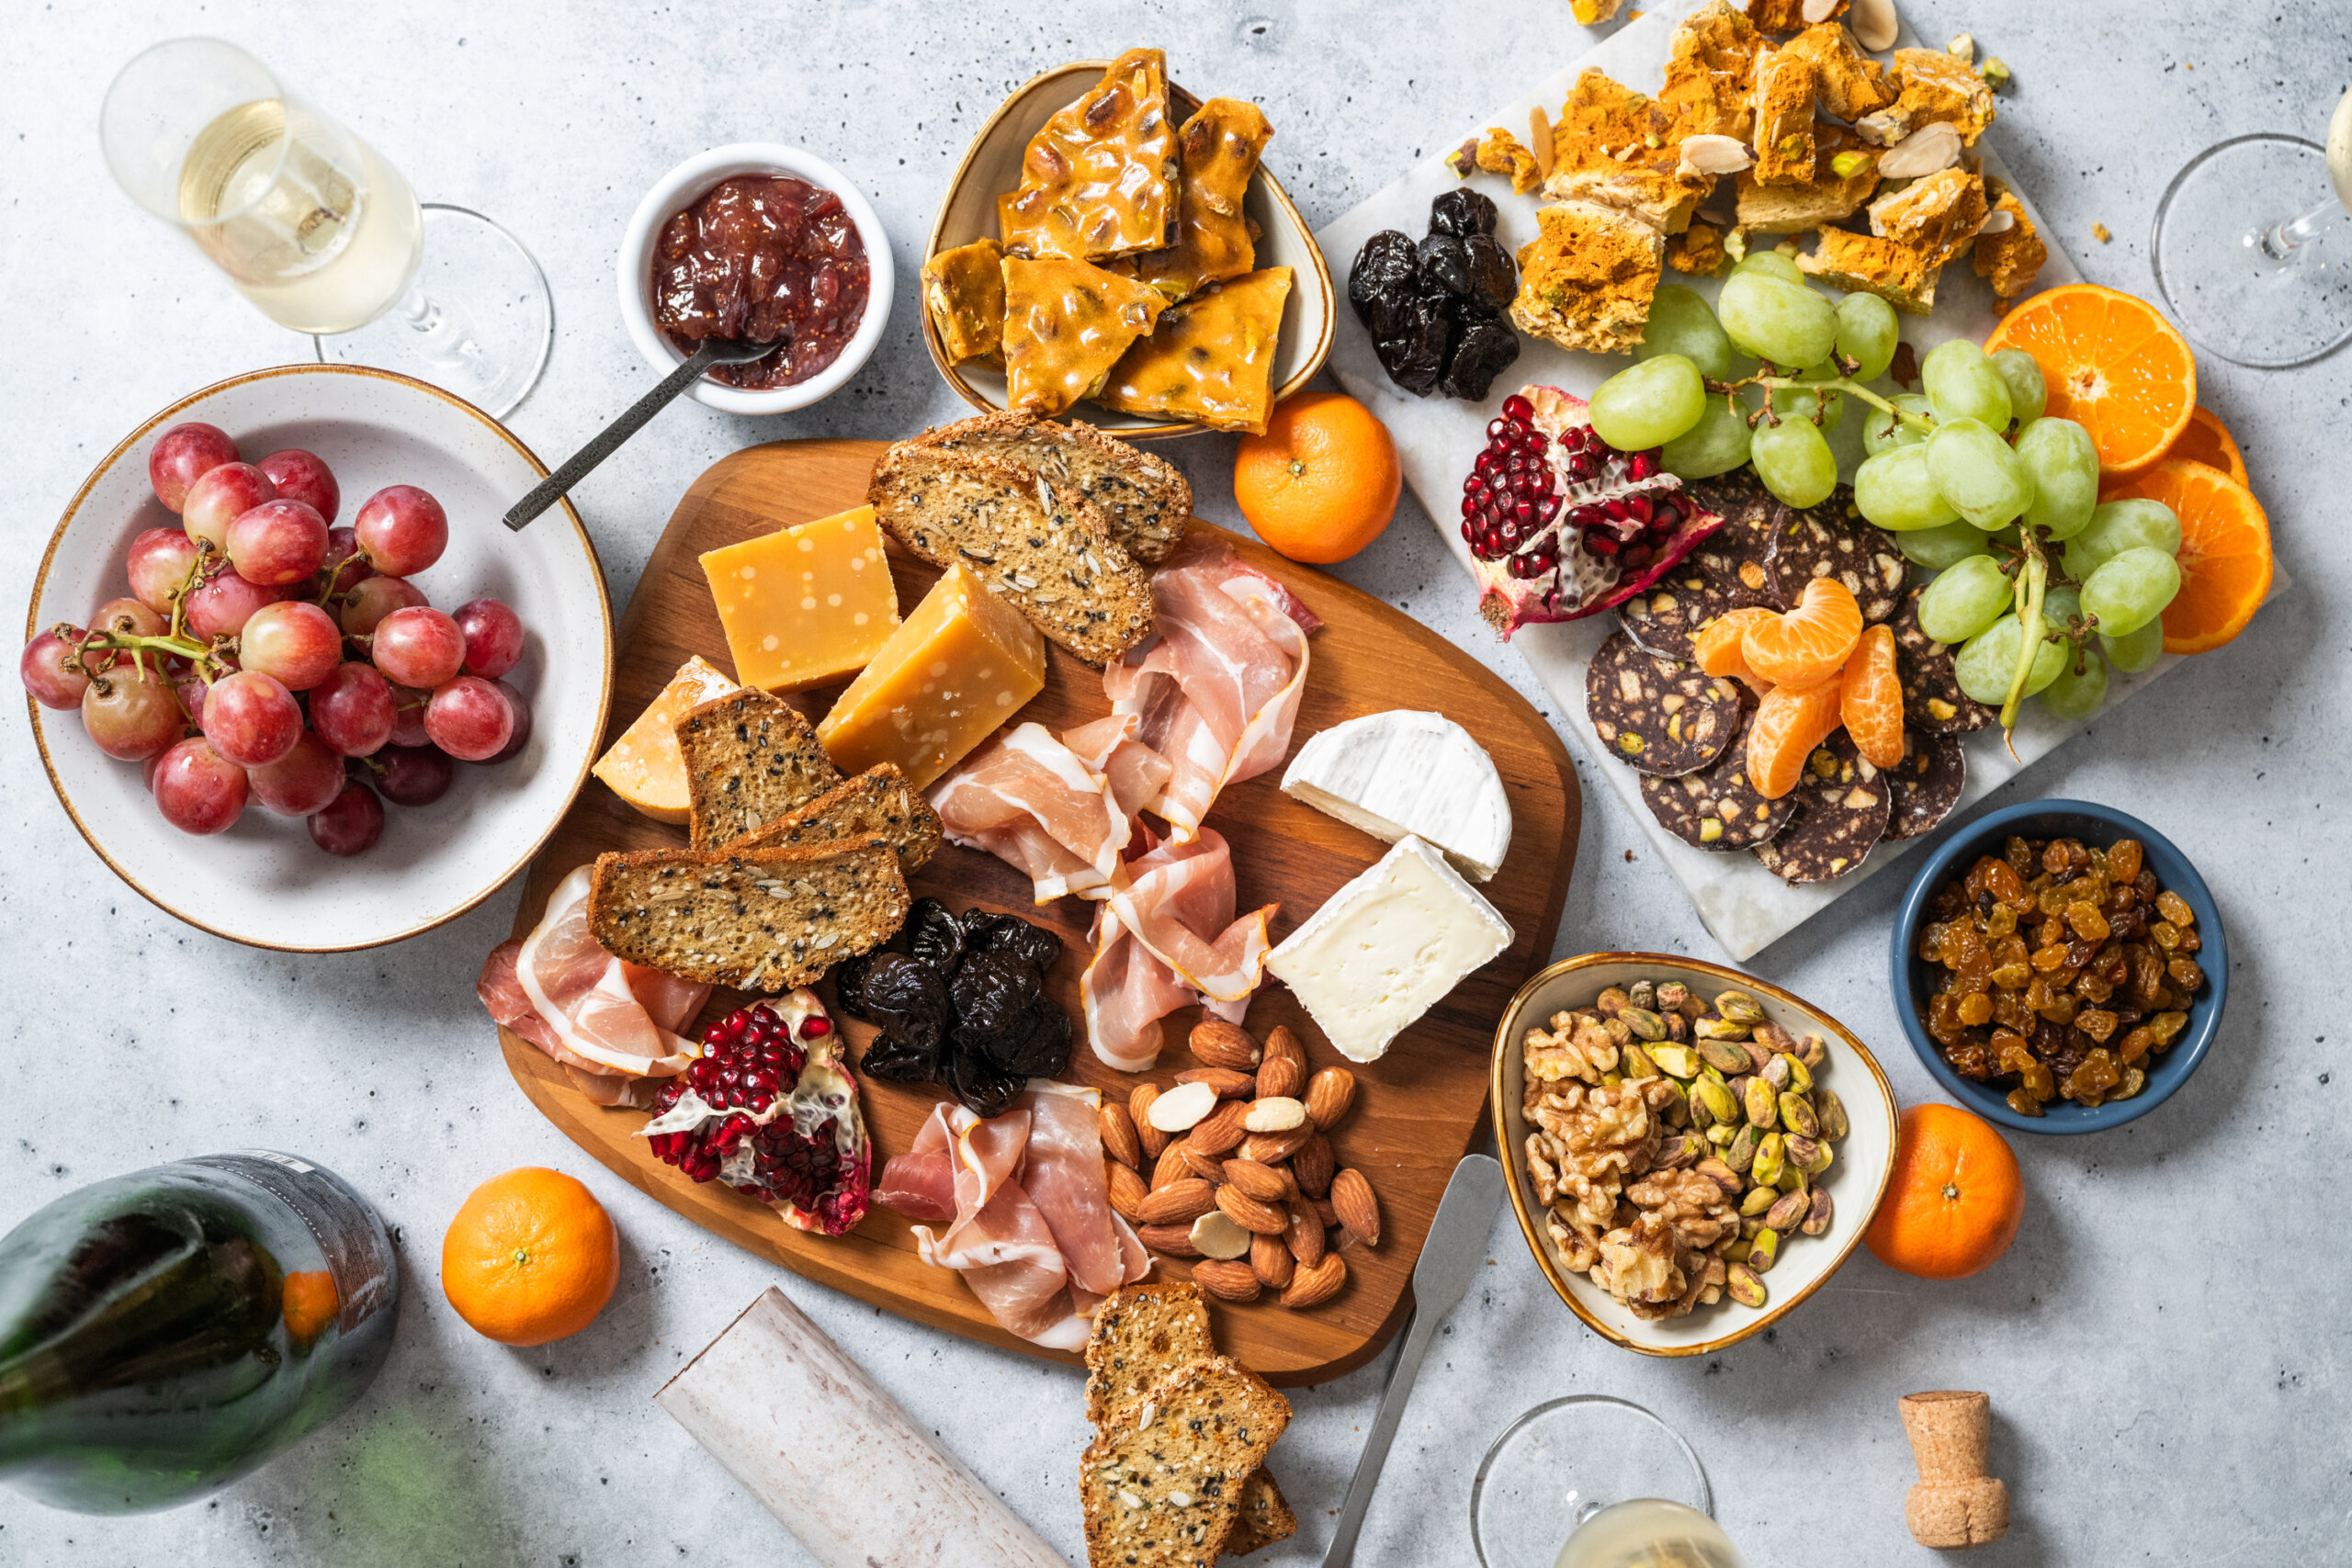 Overhead view of a cheese and charcuterie spread featuring California-grown fruits and nuts